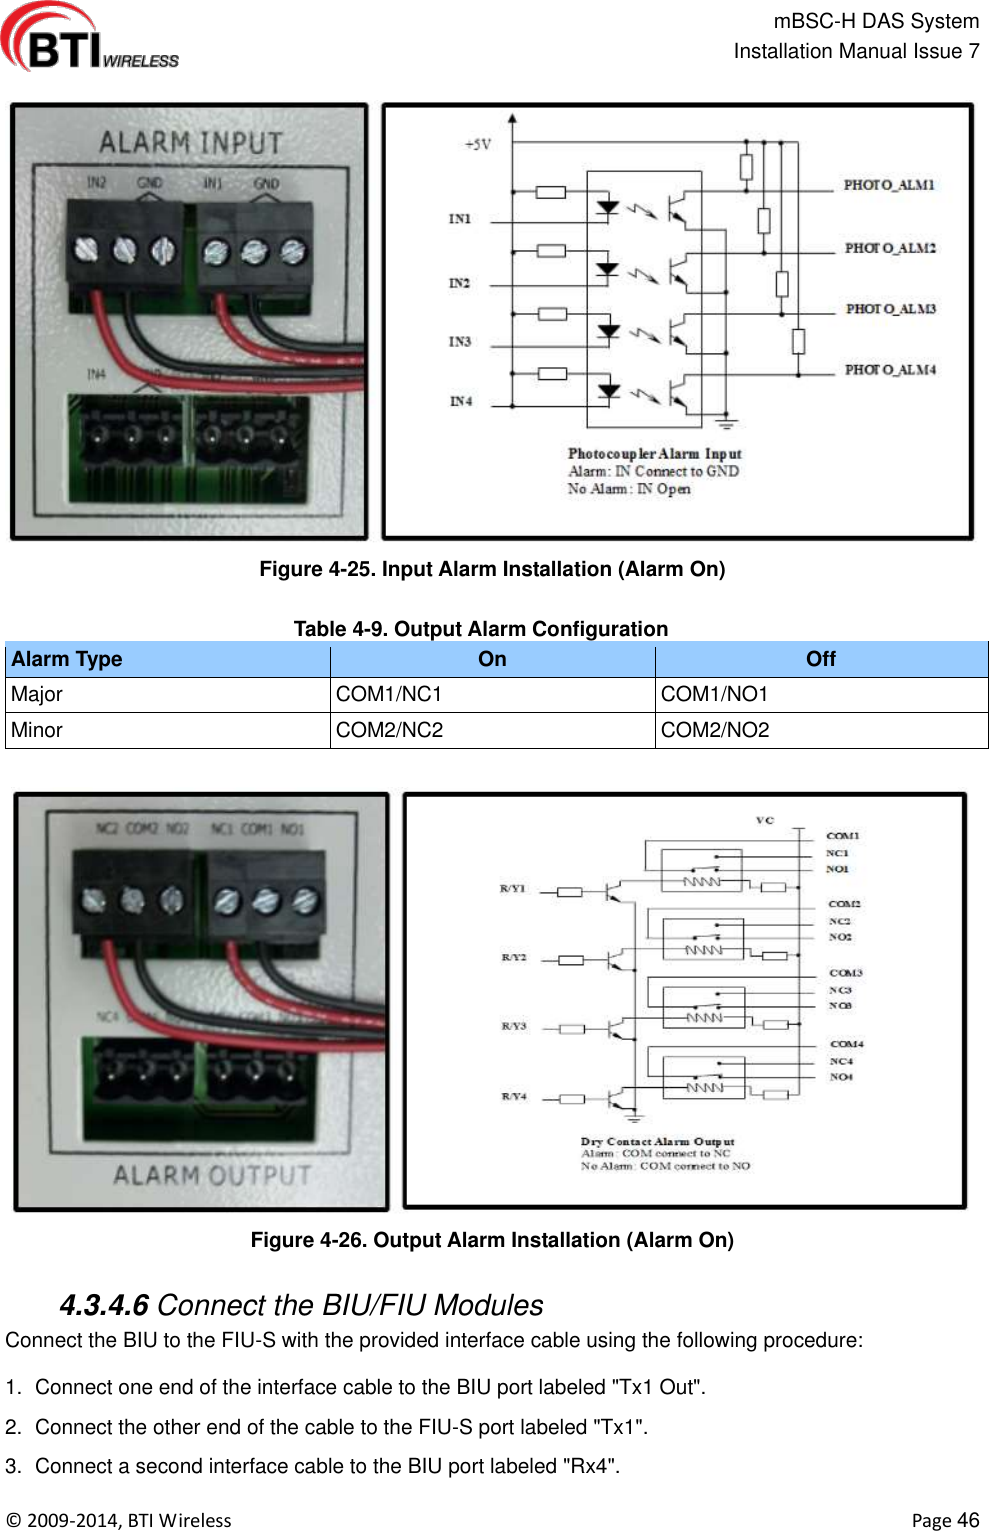                                                   mBSC-H DAS System   Installation Manual Issue 7  ©  2009-2014, BTI Wireless    Page 46  Figure 4-25. Input Alarm Installation (Alarm On)  Table 4-9. Output Alarm Configuration Alarm Type On Off Major COM1/NC1 COM1/NO1 Minor COM2/NC2 COM2/NO2  Figure 4-26. Output Alarm Installation (Alarm On)   4.3.4.6 Connect the BIU/FIU Modules Connect the BIU to the FIU-S with the provided interface cable using the following procedure:  1.  Connect one end of the interface cable to the BIU port labeled &quot;Tx1 Out&quot;. 2.  Connect the other end of the cable to the FIU-S port labeled &quot;Tx1&quot;. 3.  Connect a second interface cable to the BIU port labeled &quot;Rx4&quot;. 